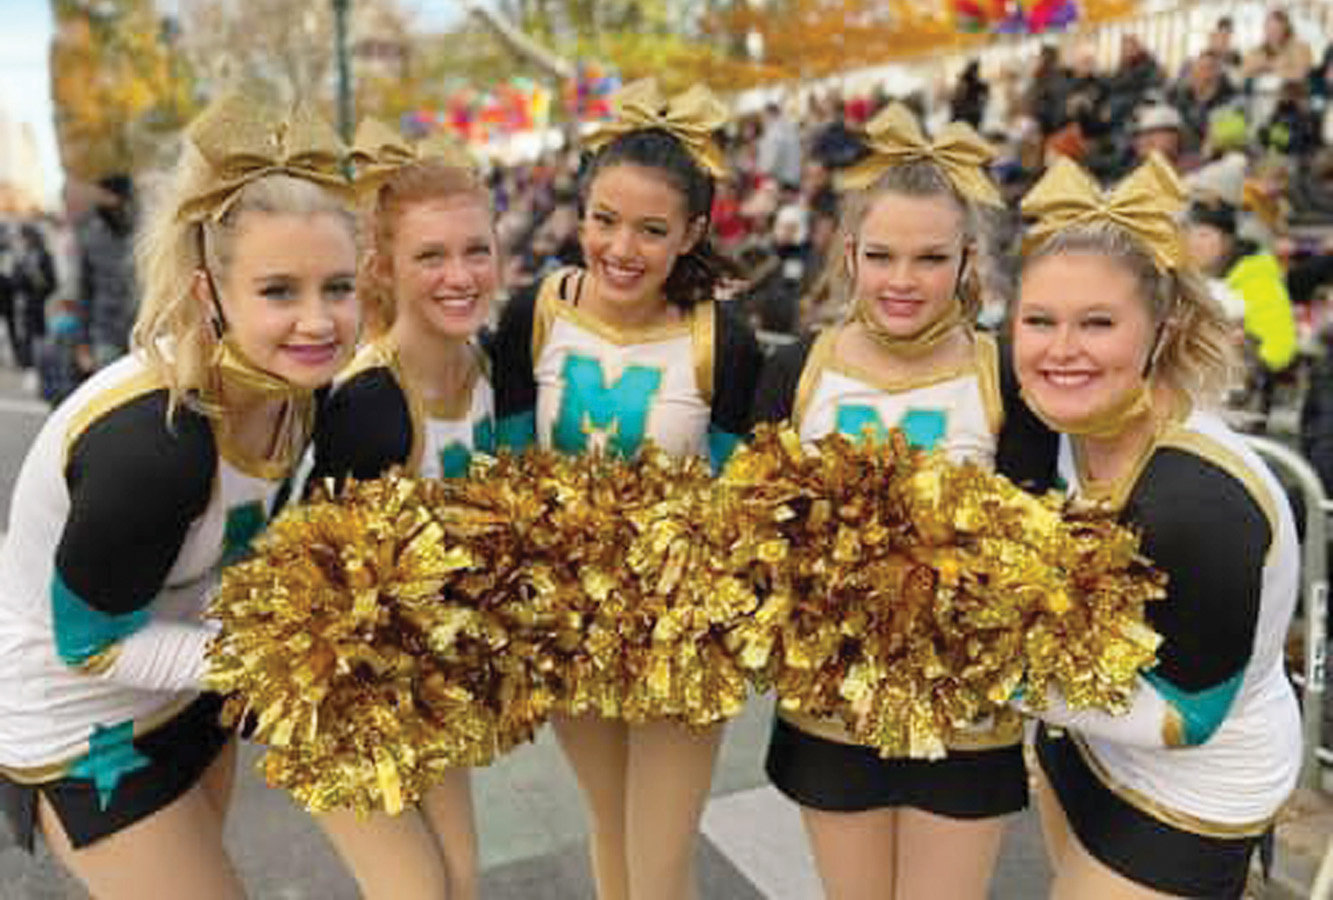 Five Washington High School Cheerleaders were in the Macy’s Thanksgiving Day Parade in New York last week. From left are Halle Dancer, Josie Castle, Gracie Cantrell, Paisley Taylor and Becca Madden.